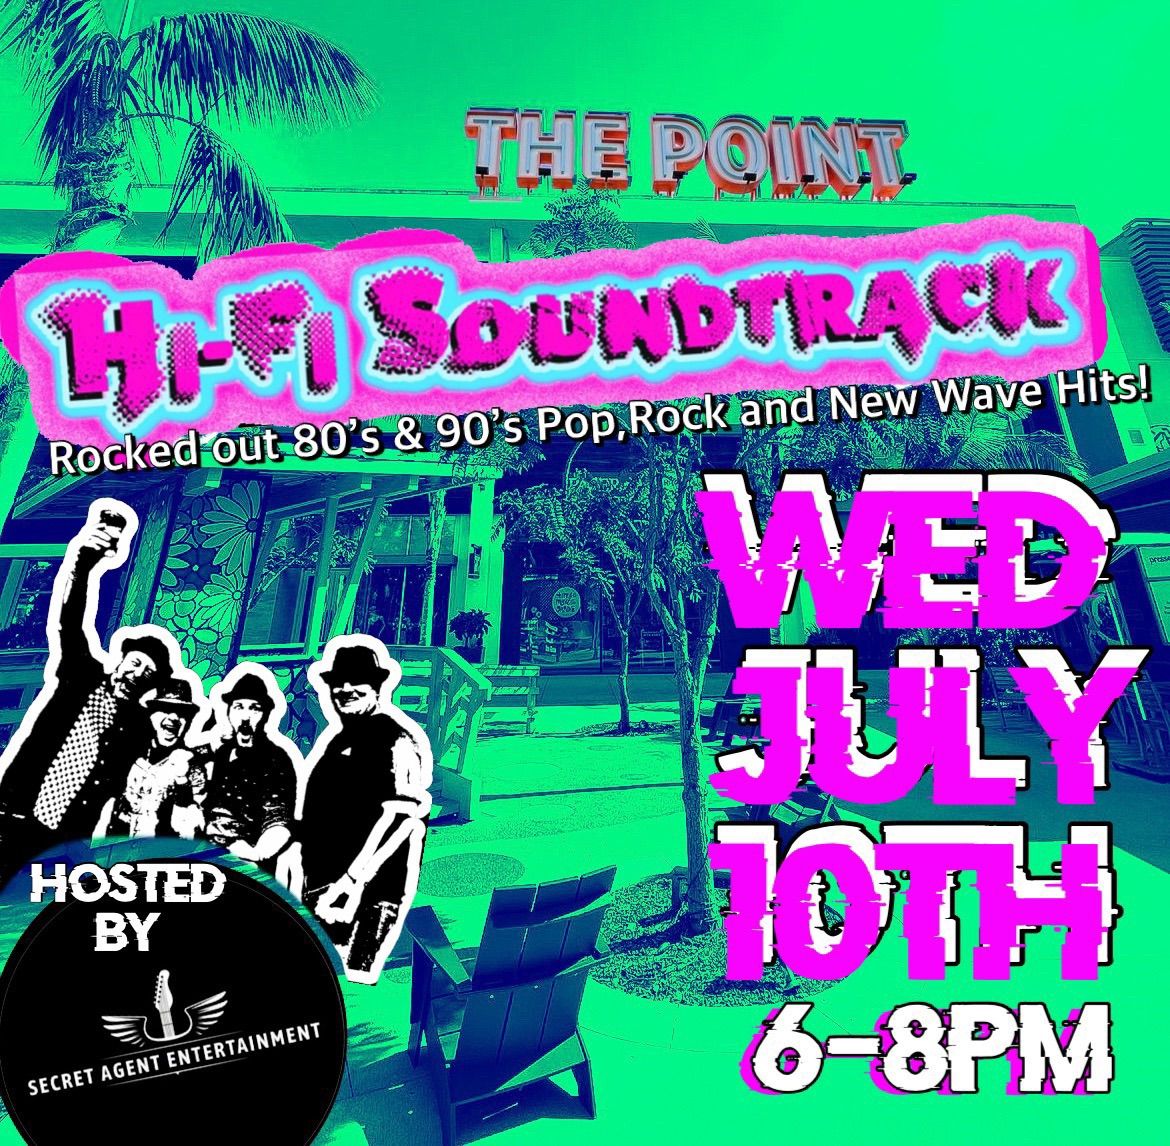 HI-FI SOUNDTRACK @ THE POINT WEDNESDAY JULY 10th 6-8pm